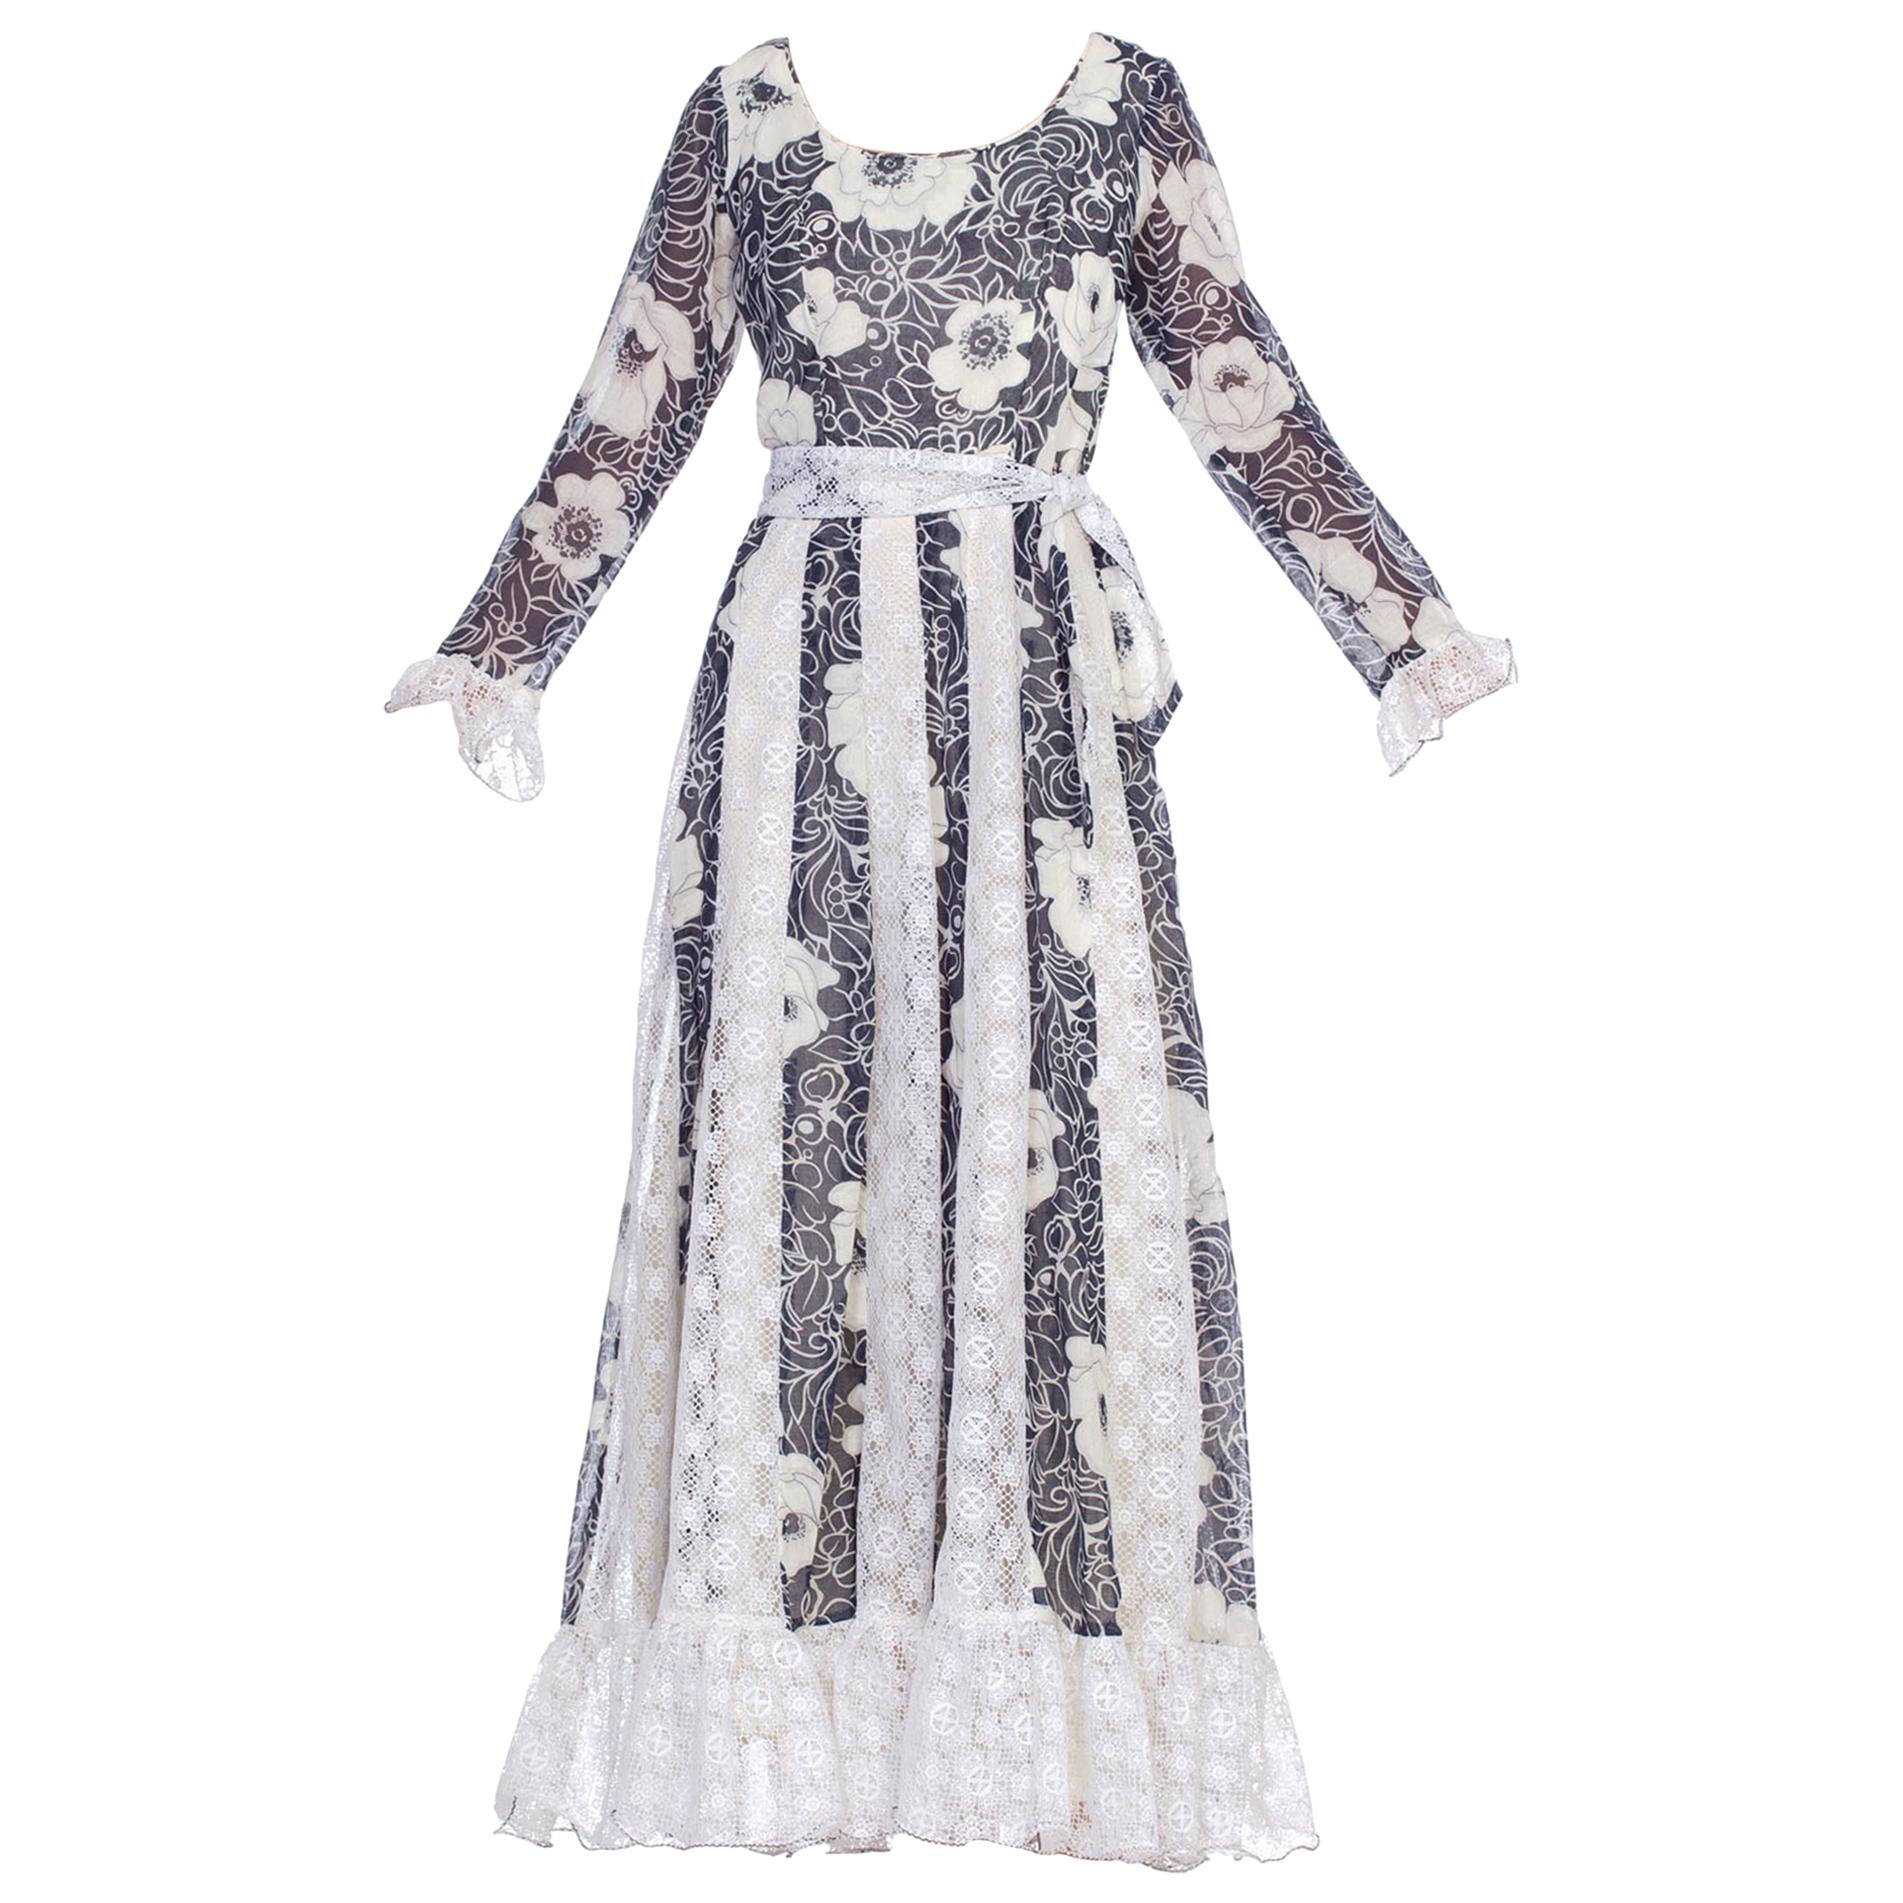 1970's Boho Victorian Revival Floral Cotton And Lace Dress